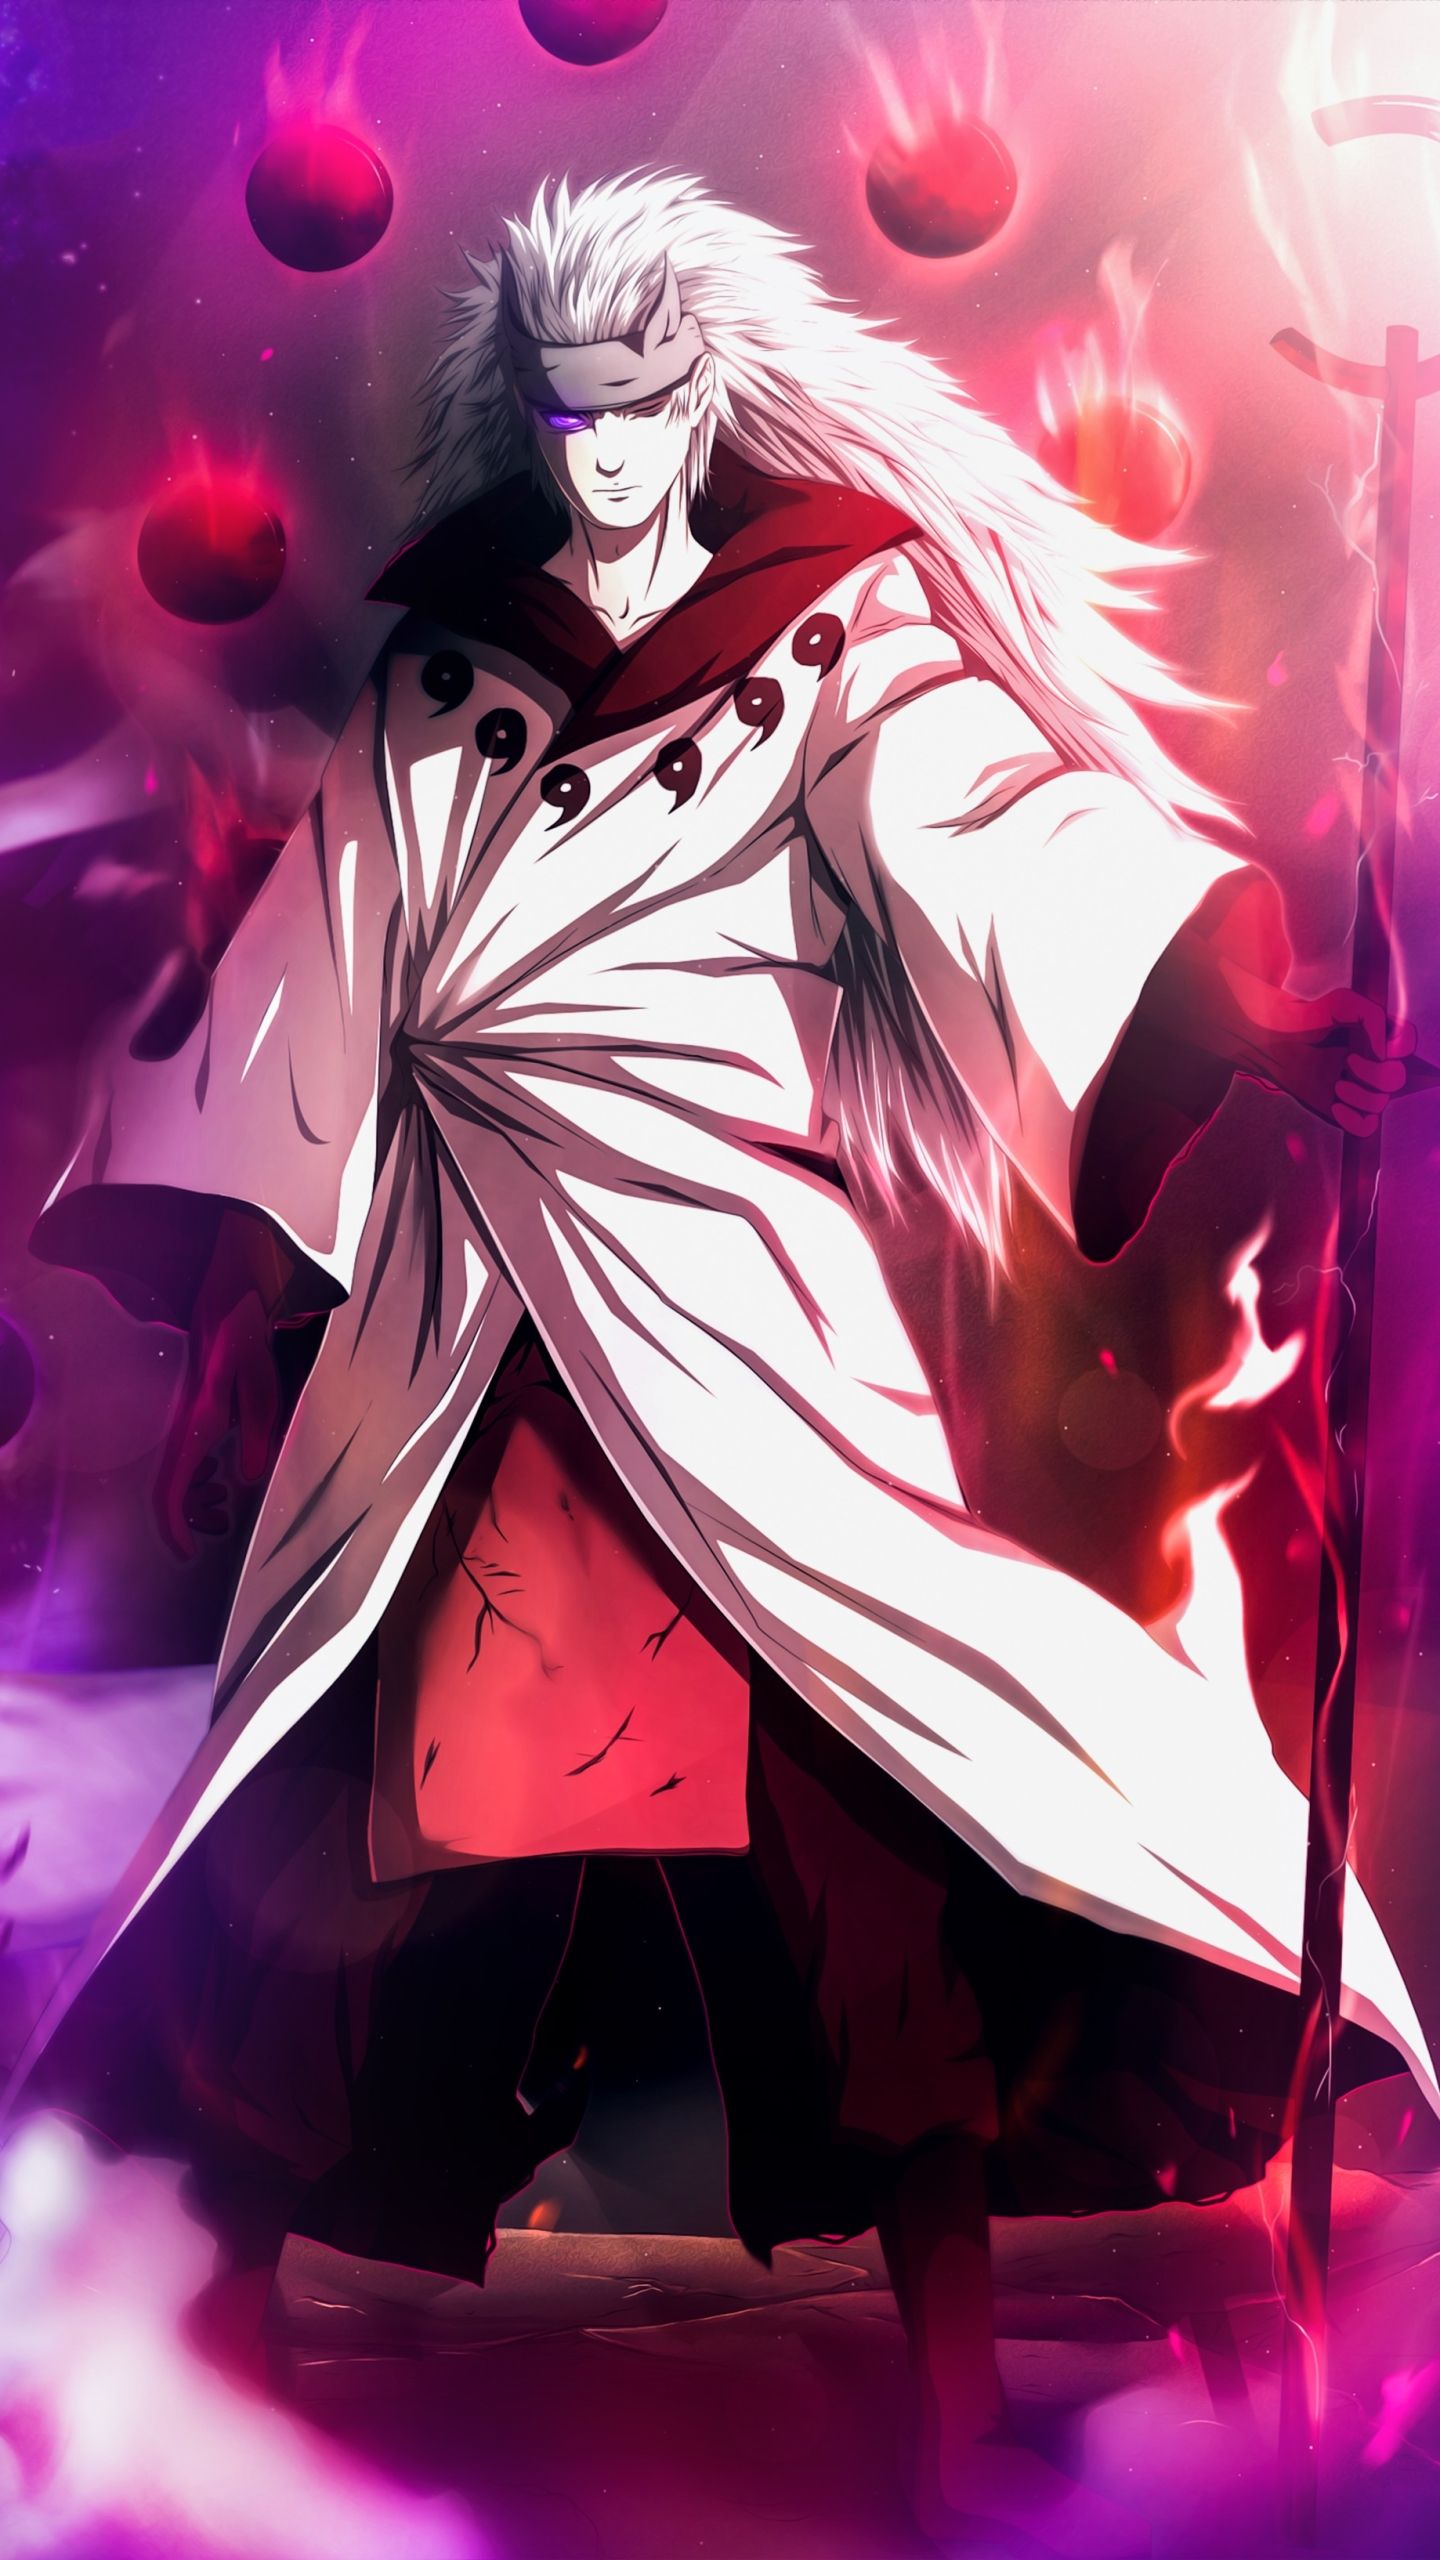 Download Madara Uchiha, a powerful warrior in the Naruto franchise |  Wallpapers.com